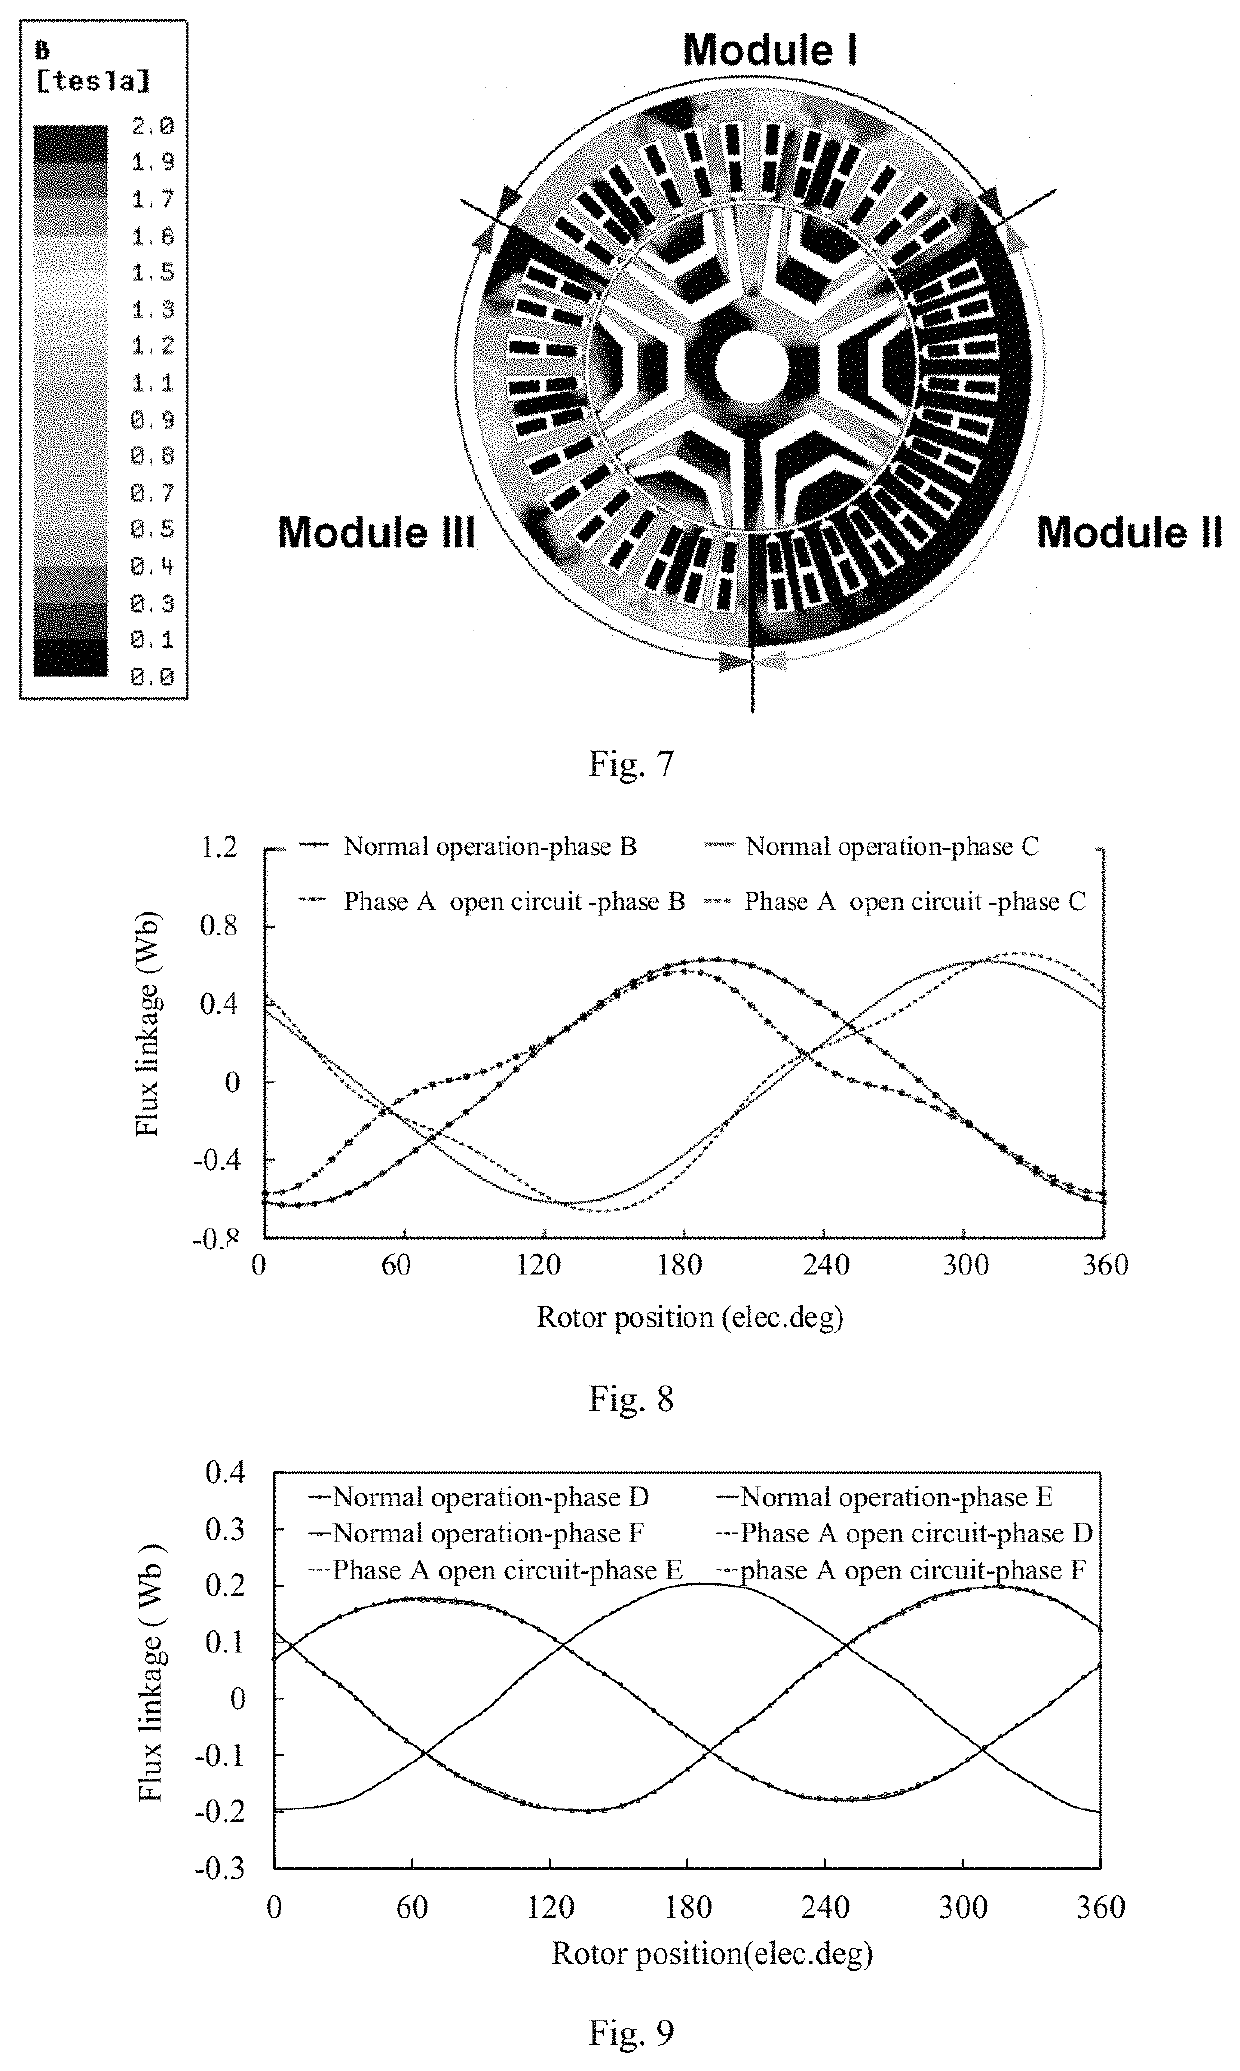 A fault-tolerant modular permanent magnet assisted synchronous reluctance motor and modular winding design method